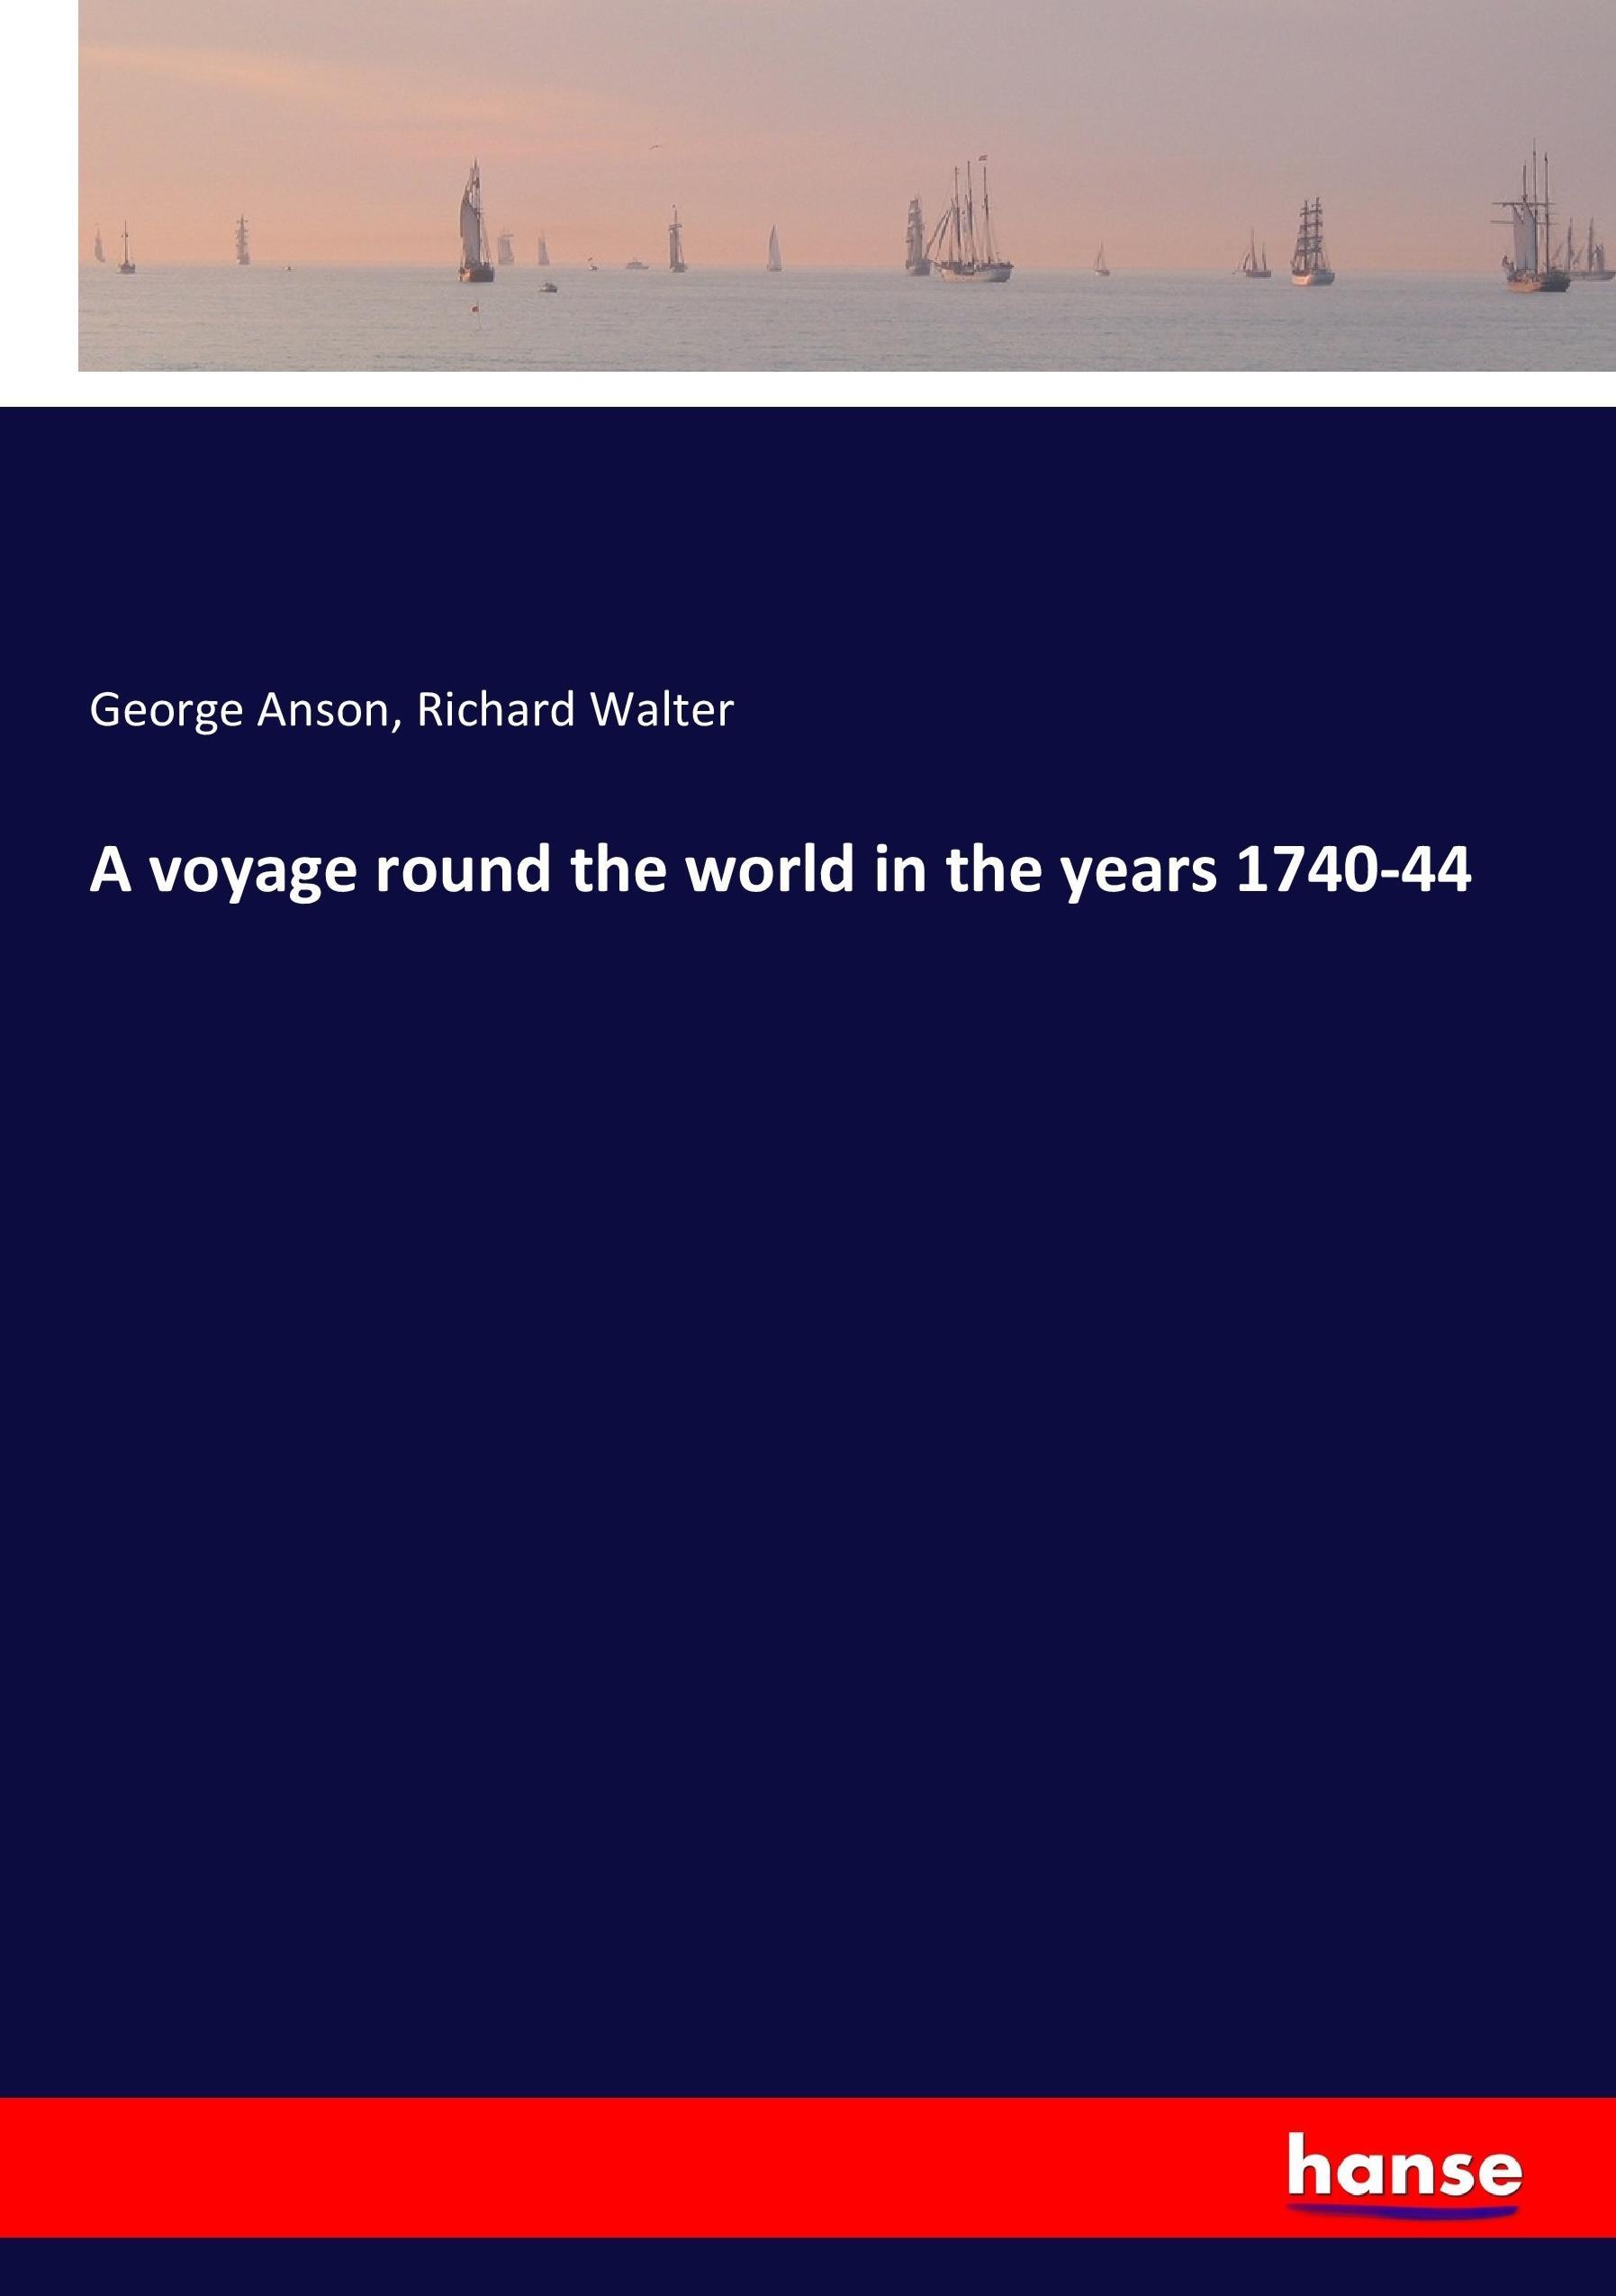 A voyage round the world in the years 1740-44 - Anson, George Walter, Richard